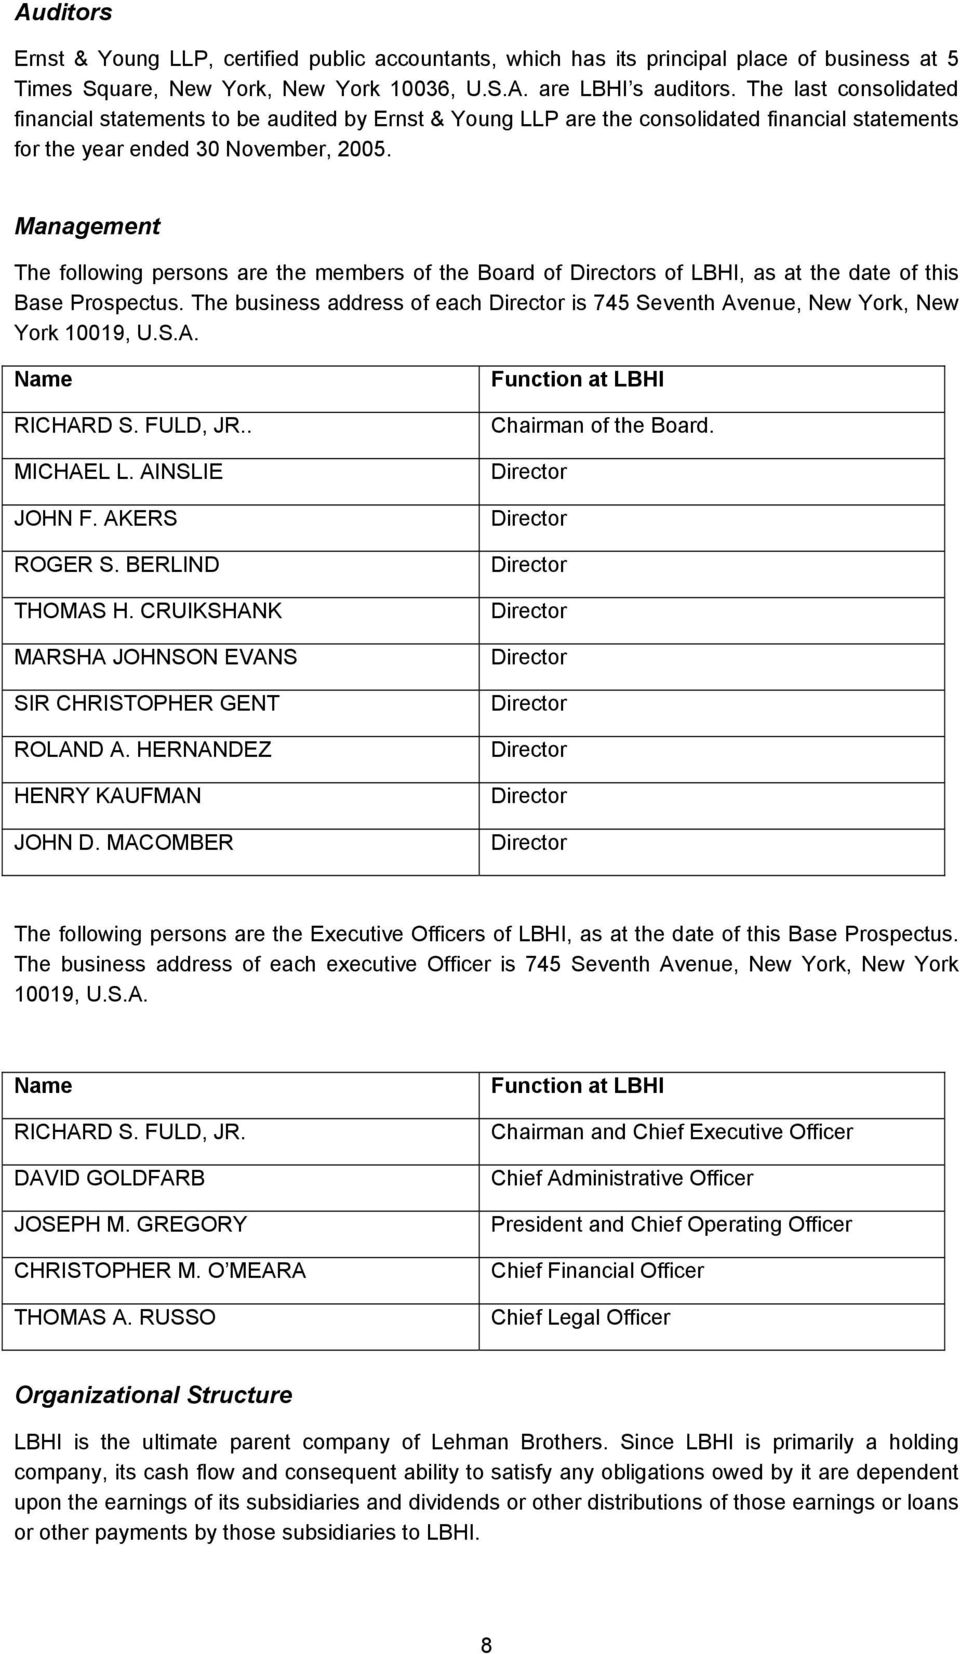 Management The following persons are the members of the Board of Directors of LBHI, as at the date of this Base Prospectus.